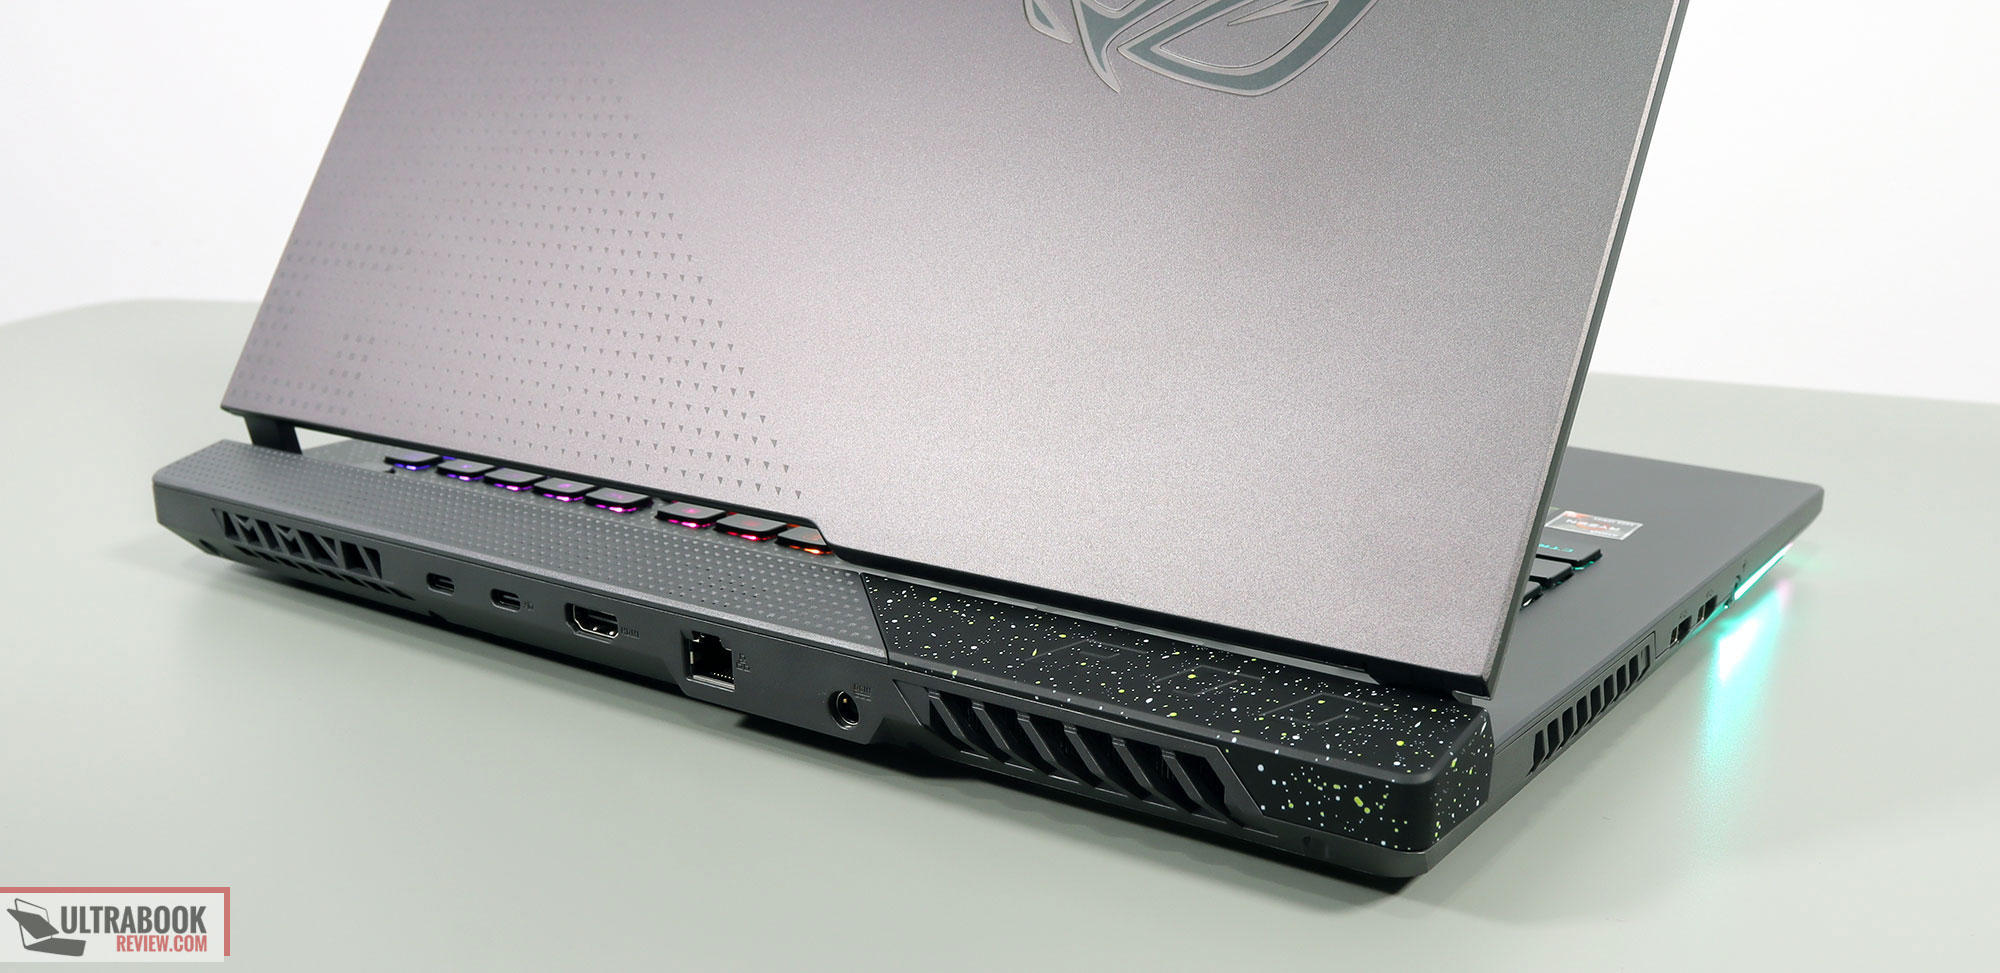 Asus ROG Strix G16 review: A powerful laptop with cyberpunk styling